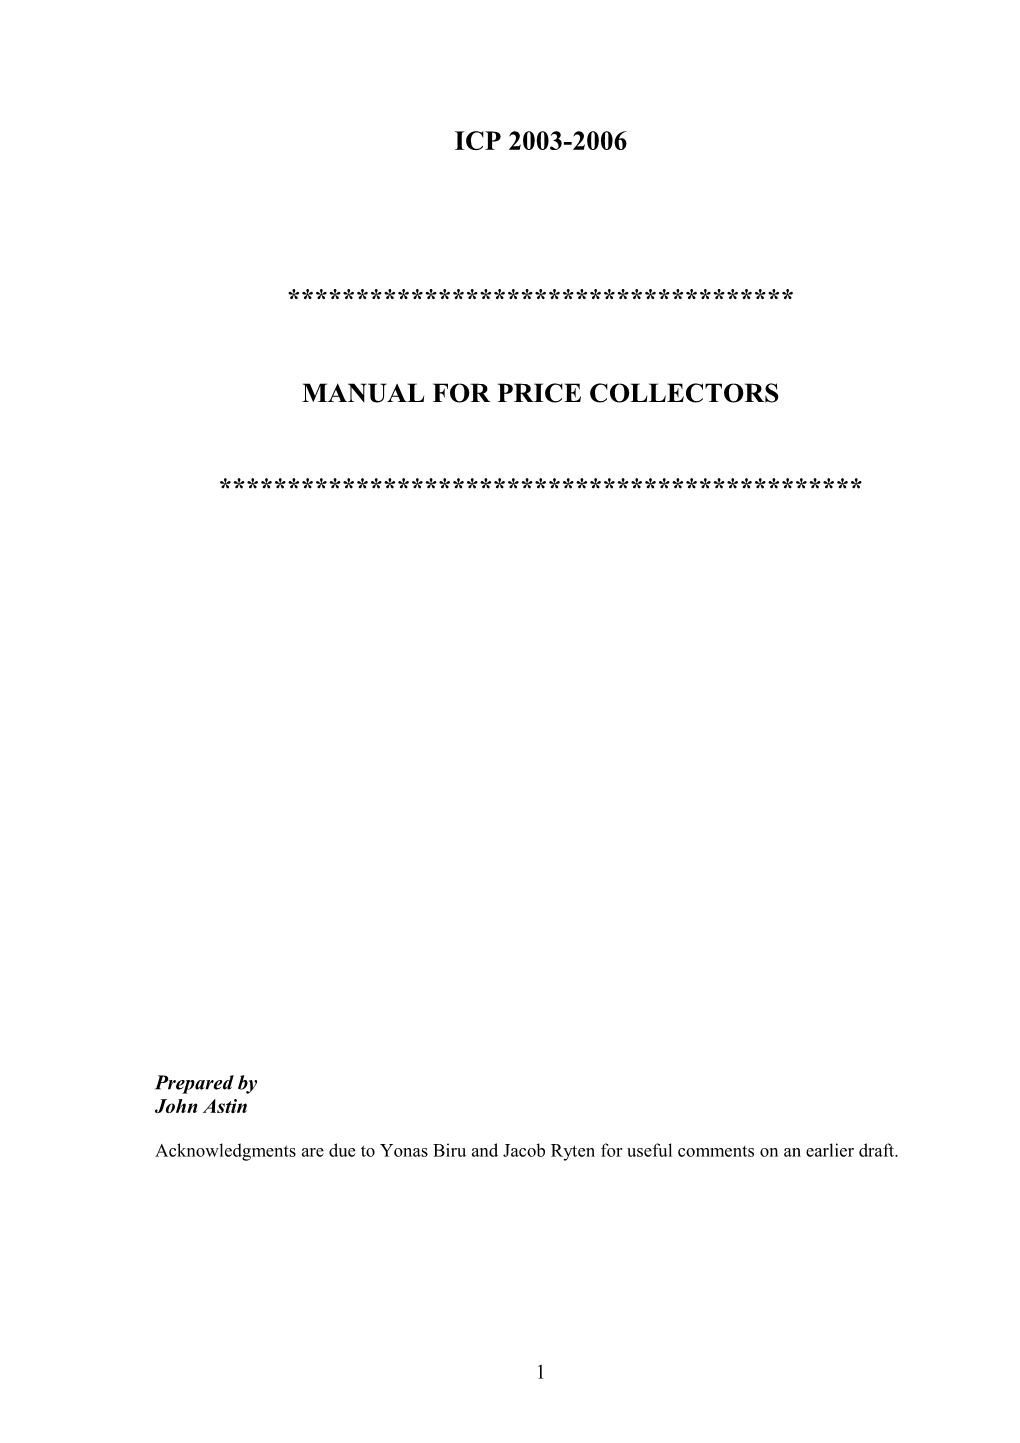 Manual for Price Collectors